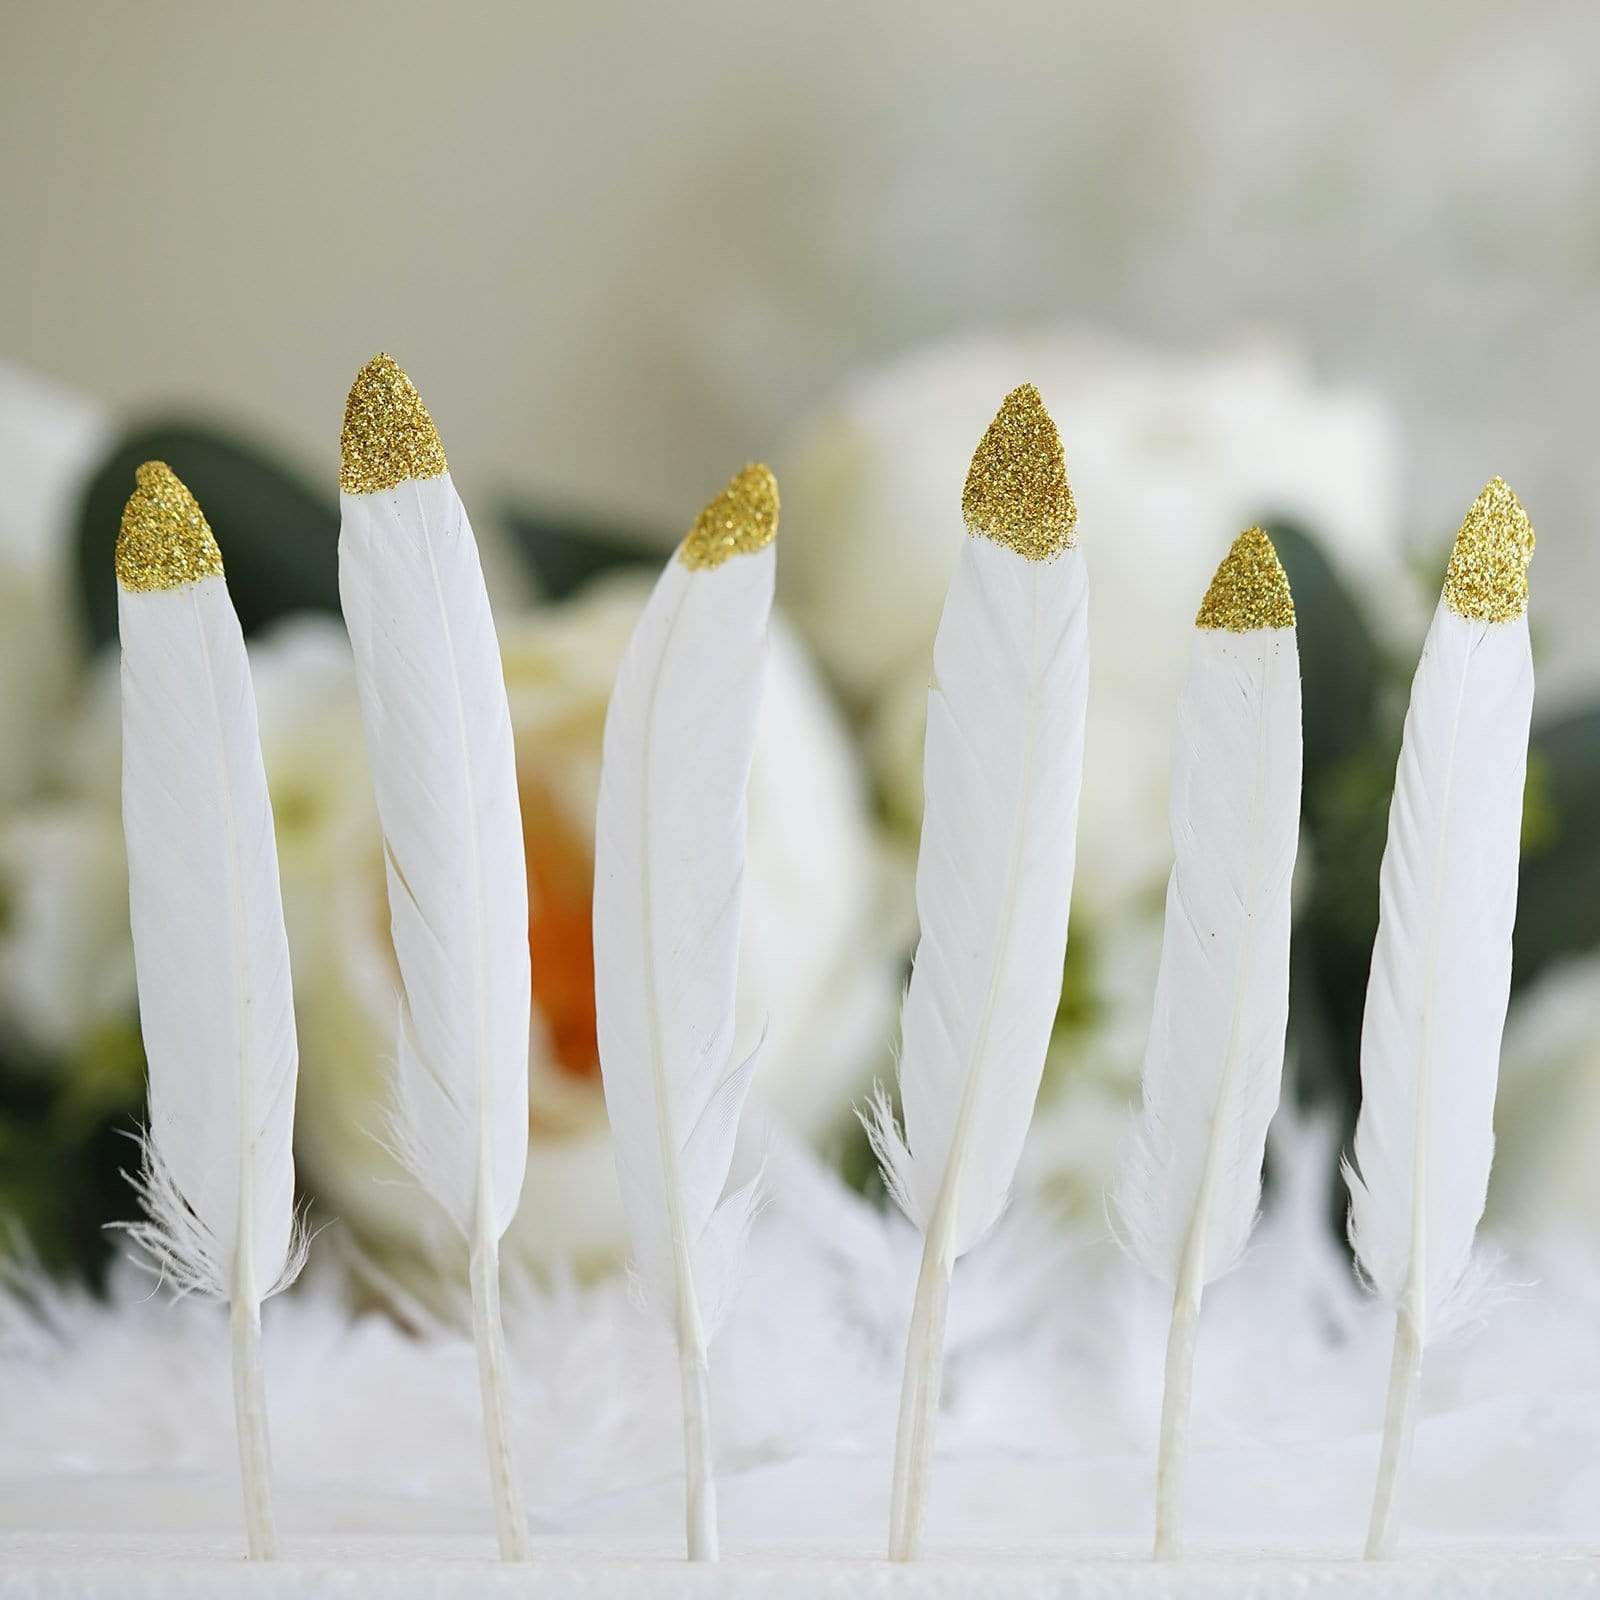 30 Tip Natural Decorative Turkey Feathers